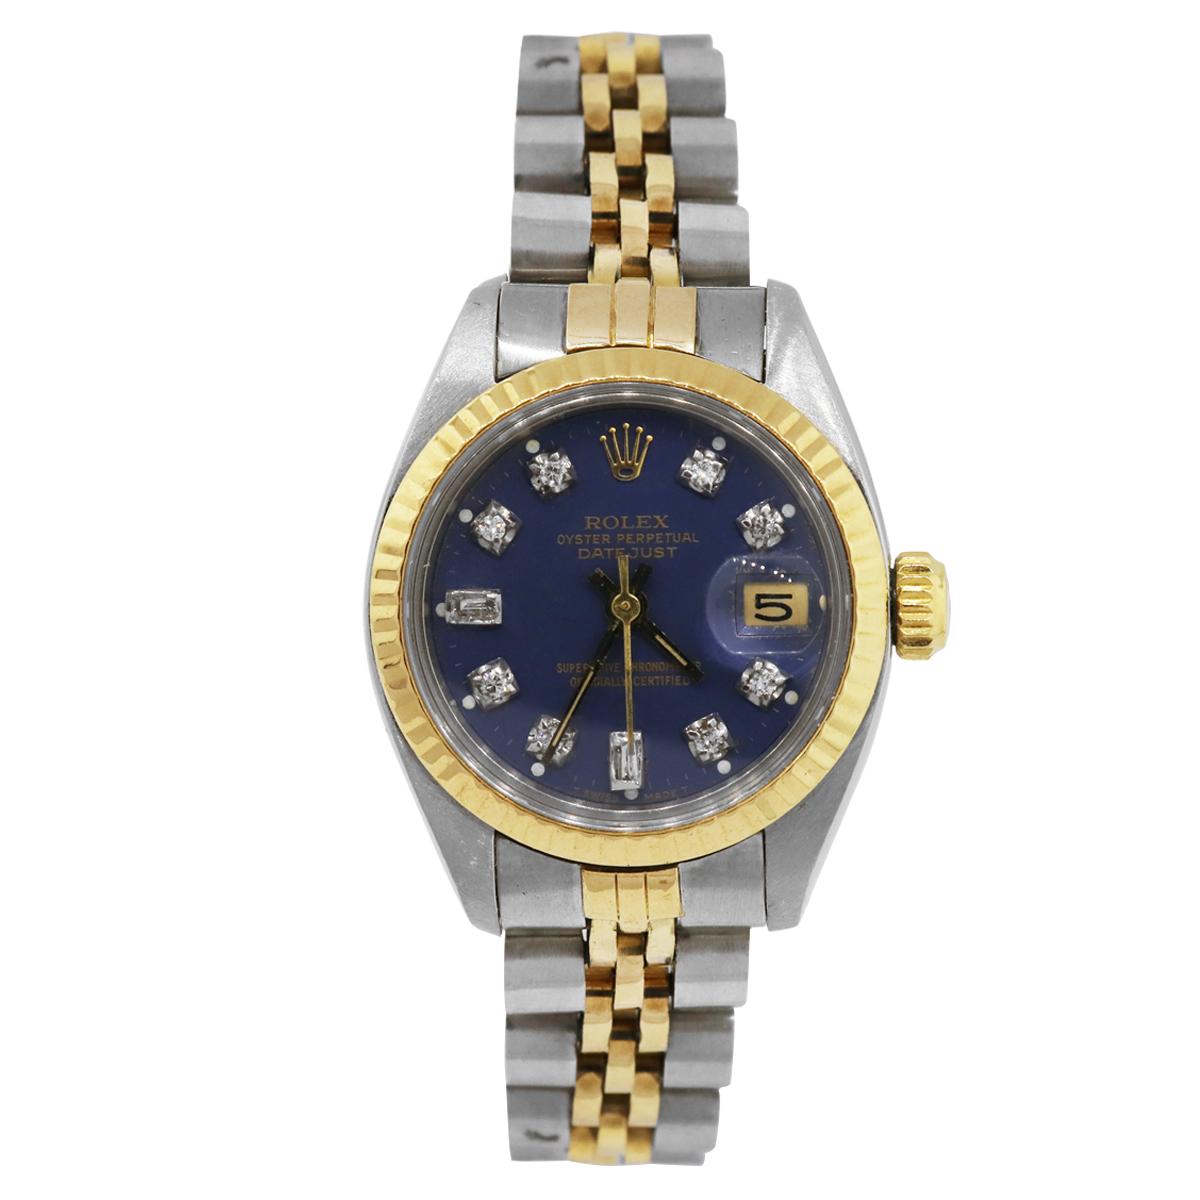 Brand: Rolex
MPN: 6917
Model: Datejust
Case Material: 18k yellow gold
Case Diameter: 26mm
Bezel: 18k yellow gold fluted fixed bezel
Dial: Aftermarket Blue dial with diamond hour markers, yellow gold hands and date window at the 3 o’clock